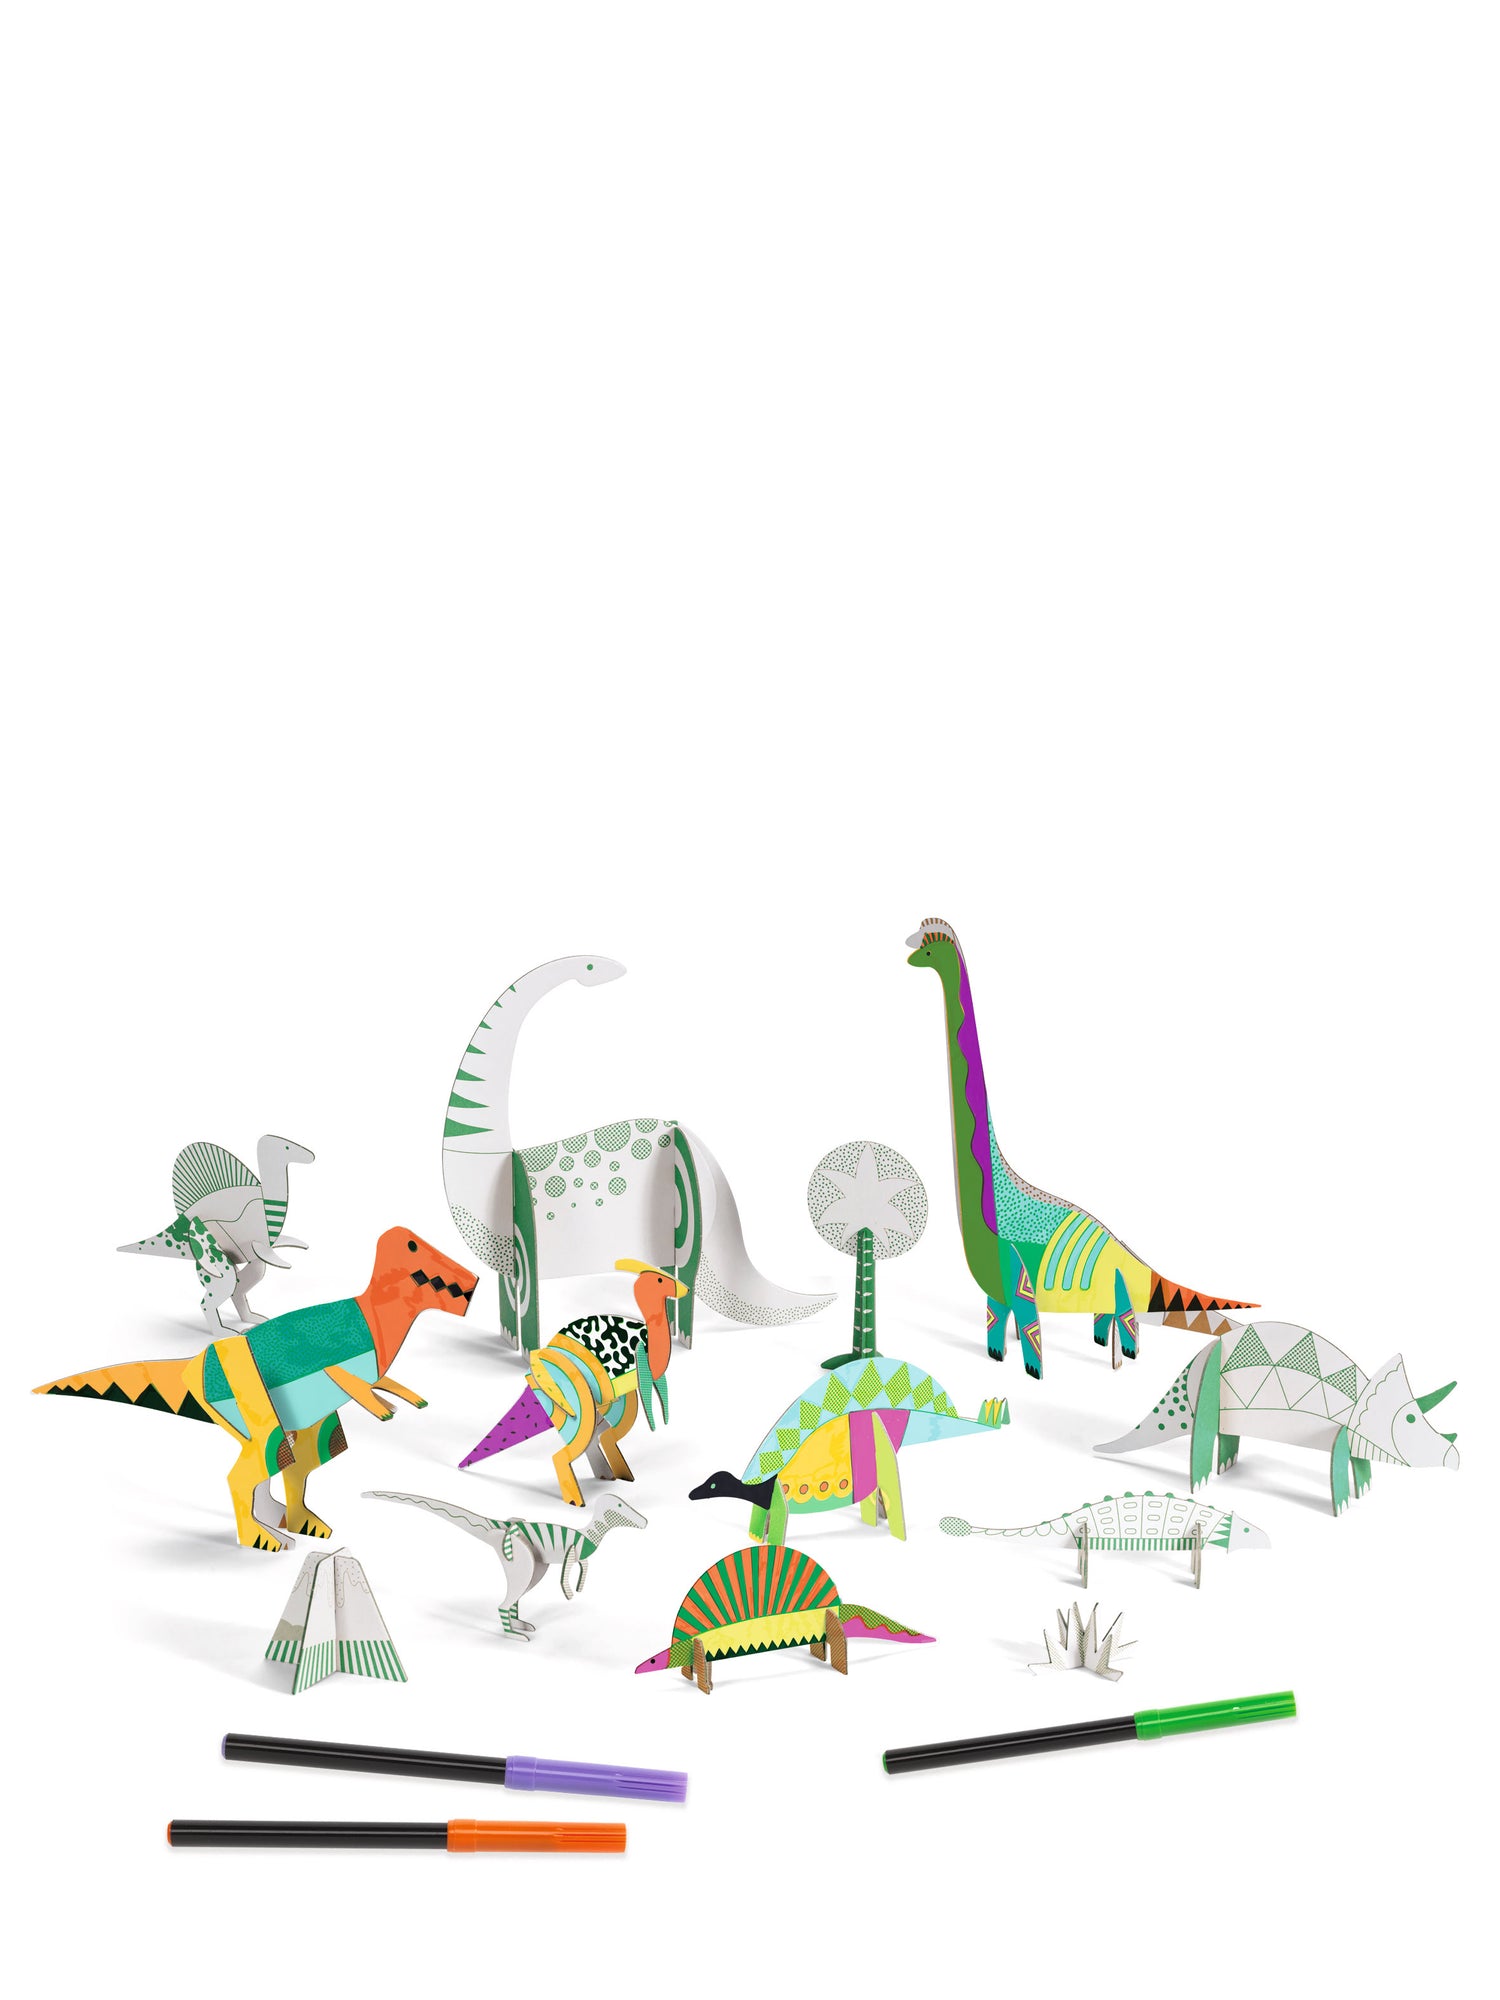 Dinosaurs to color, assemble and play